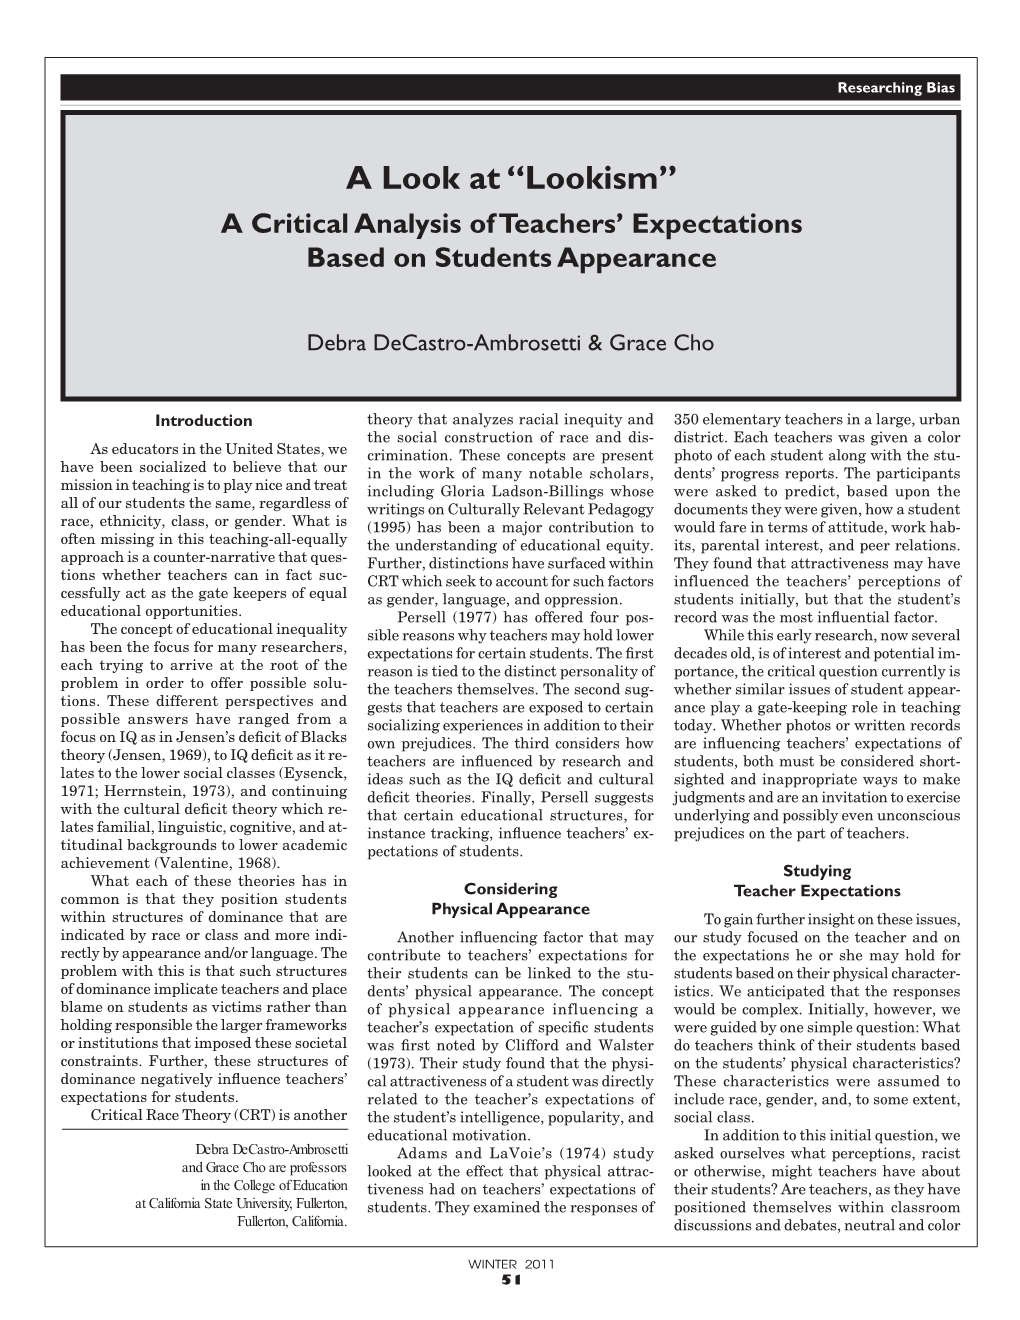 Lookism” a Critical Analysis of Teachers’ Expectations Based on Students Appearance